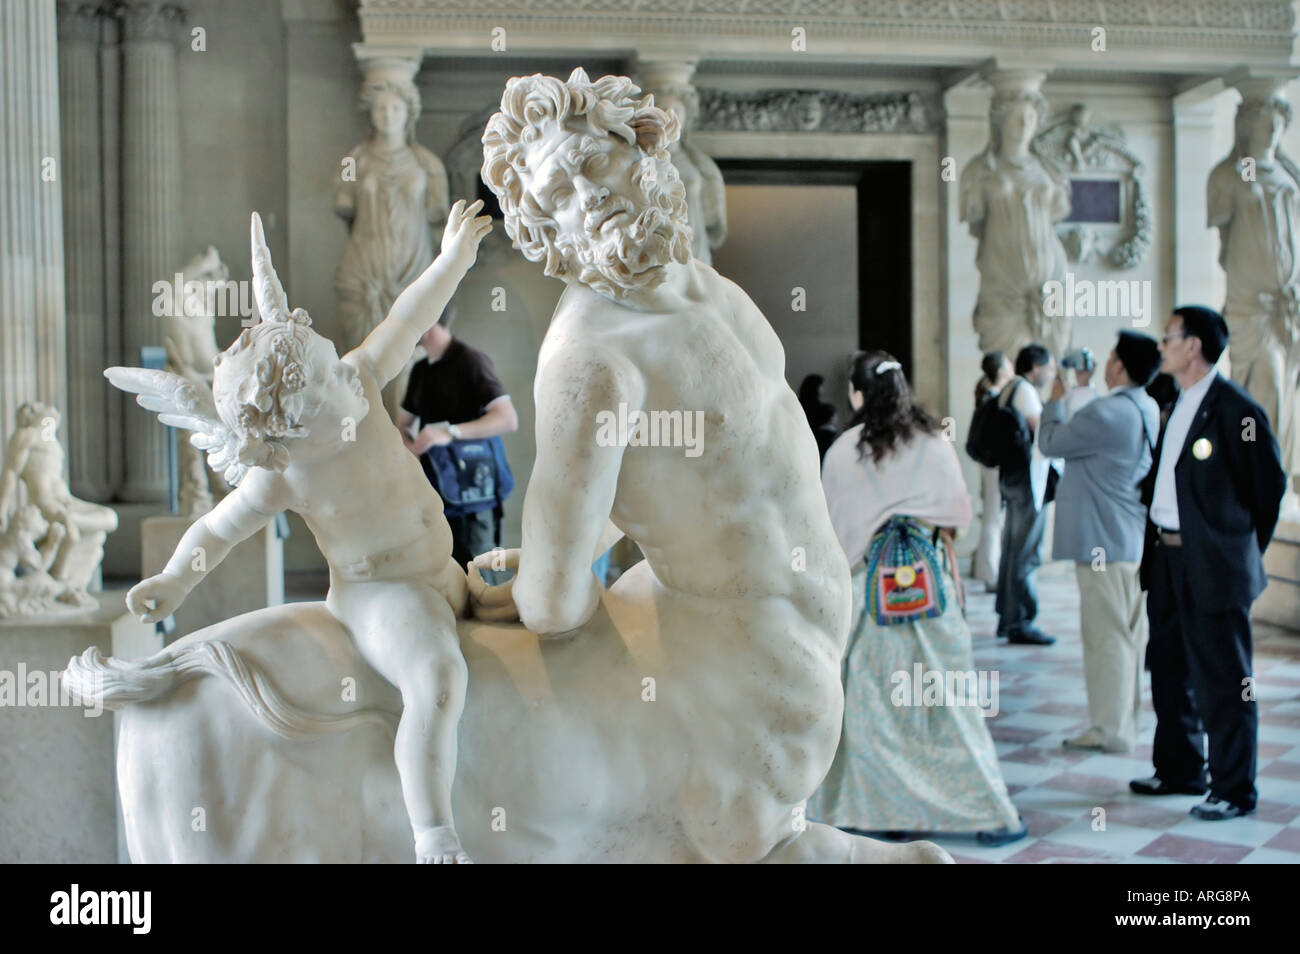 Paris France, Chinese People Looking Monuments Interior Louvre Museum Statue  "Centaur Straddled by the God of Love" Le Centaur chevaucé par l'Amour" i  Stock Photo - Alamy